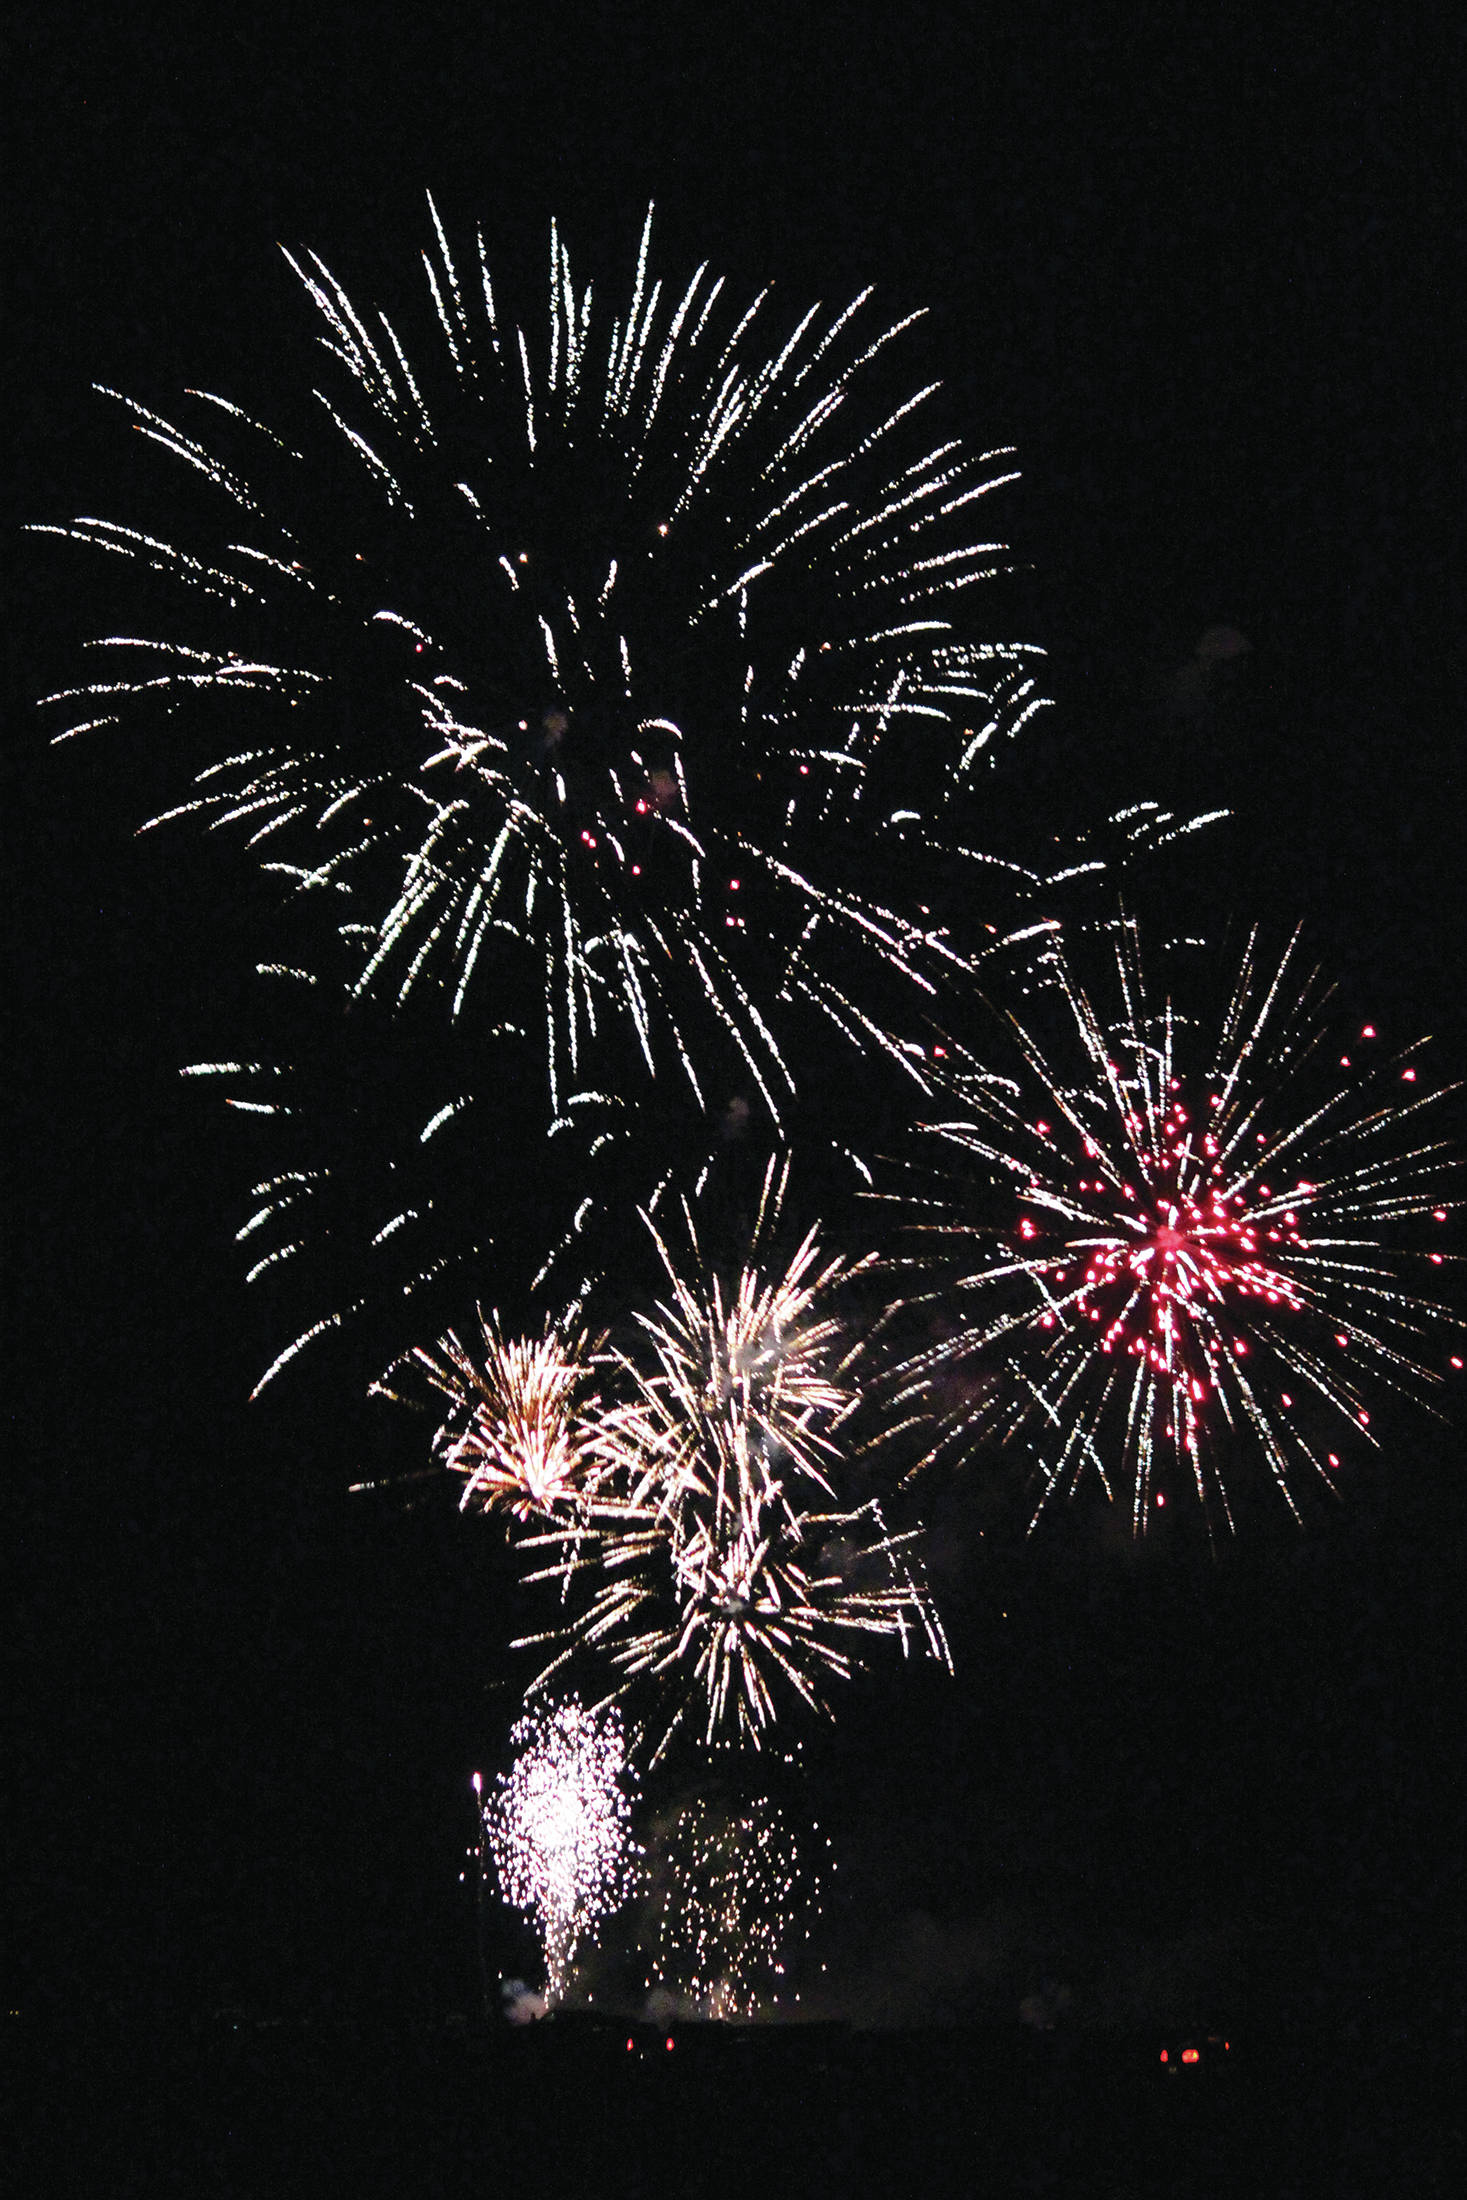 Fireworks explode above the Homer Spit on Dec. 31, 2020 as part of the third annual crowdfunded fireworks in Homer, Alaska. (Photo by Megan Pacer/Homer News)